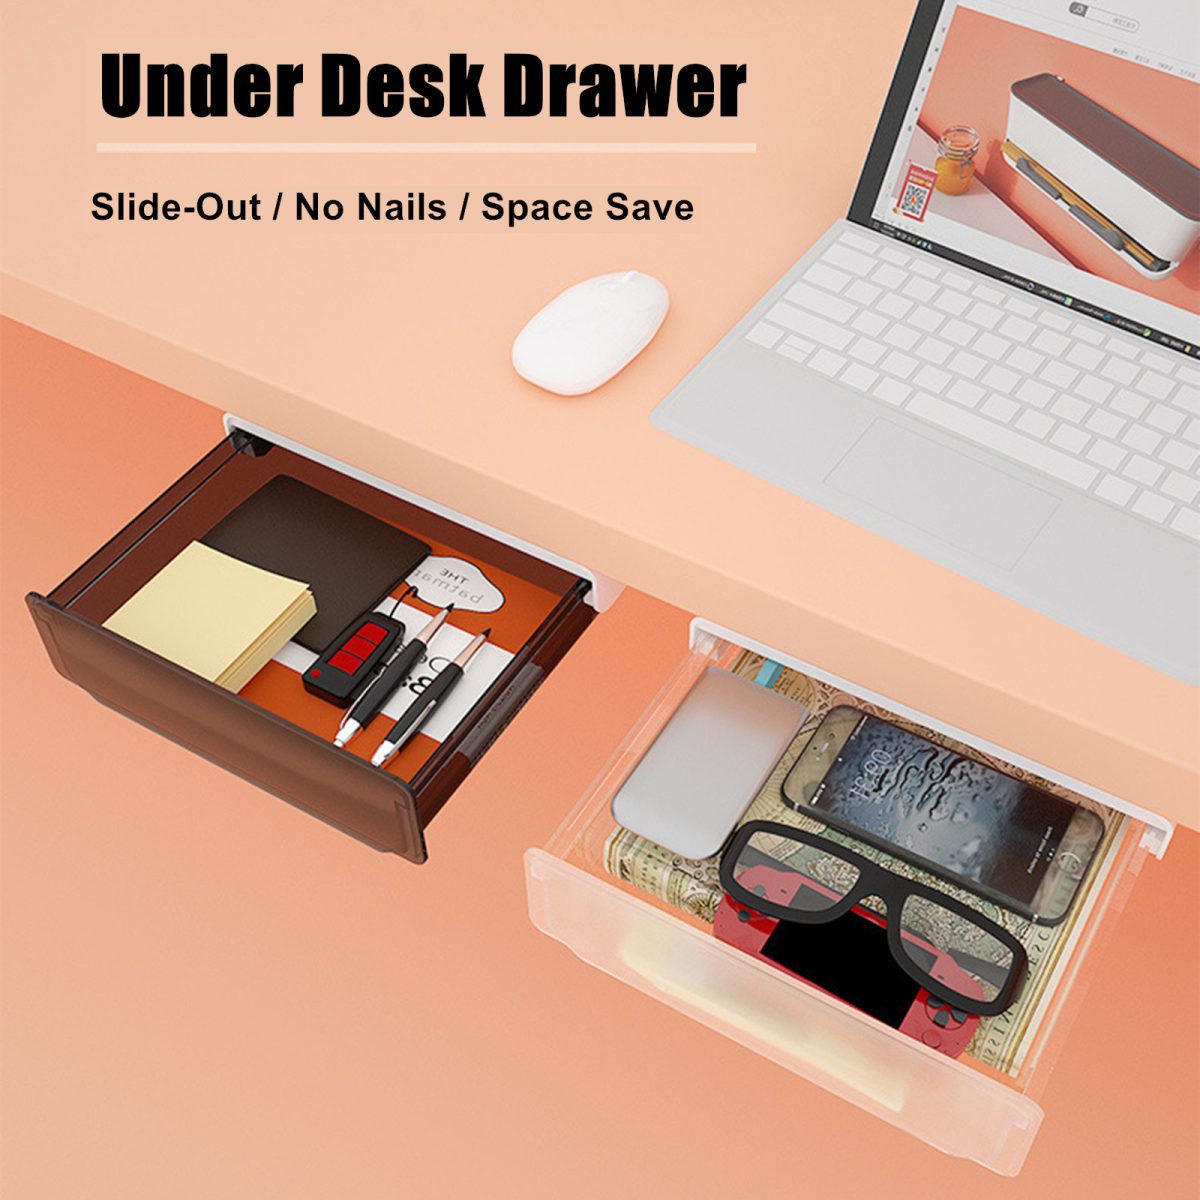 Under Desk Drawer Slide-out Large Office Organizers and Storage Drawers – Black, Small